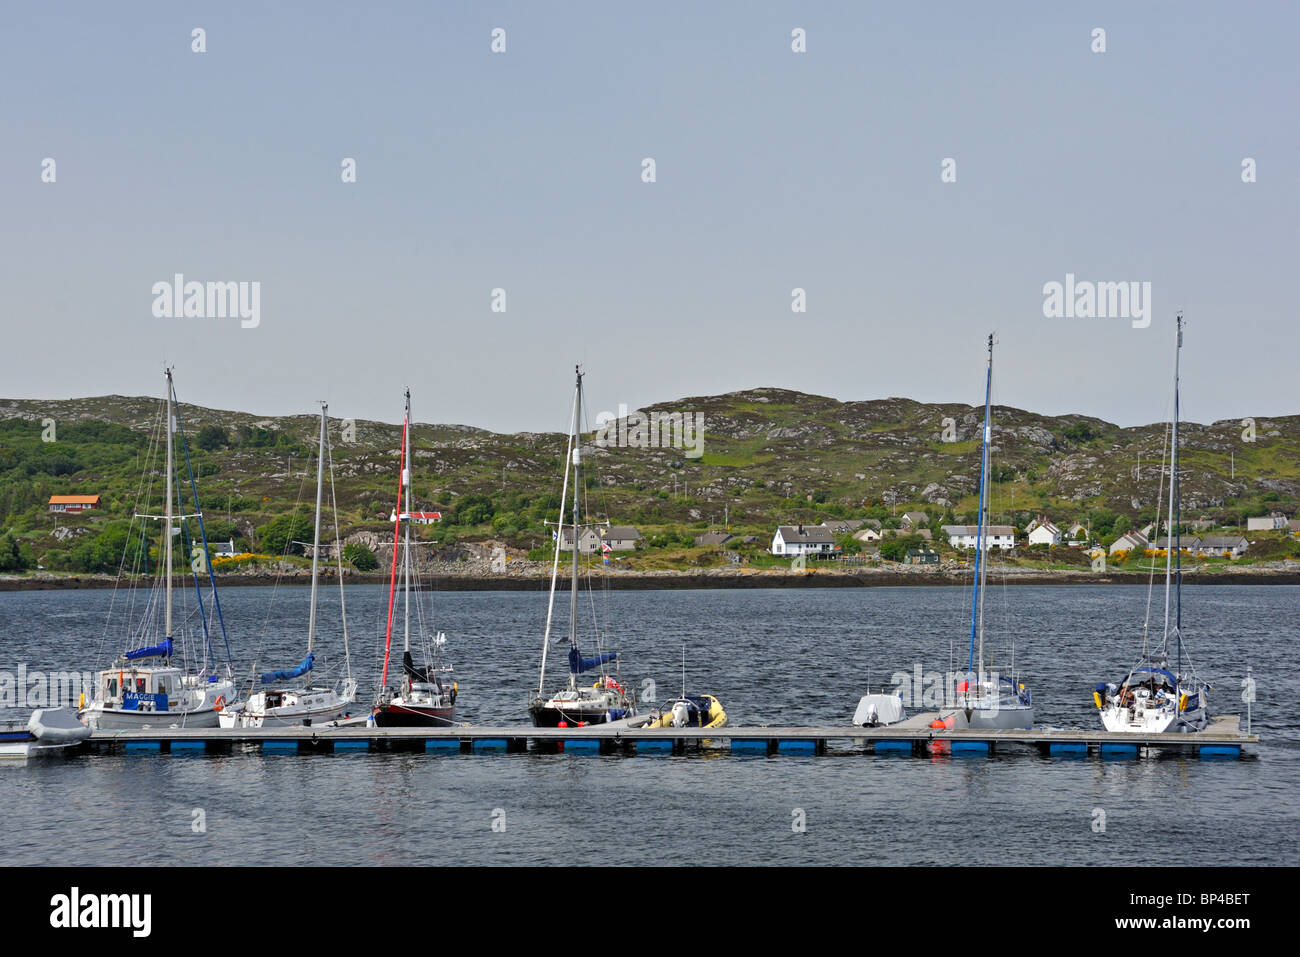 Yachts in harbour. Lochinver, Assynt, Sutherland, Scotland, United Kingdom, Europe. Stock Photo